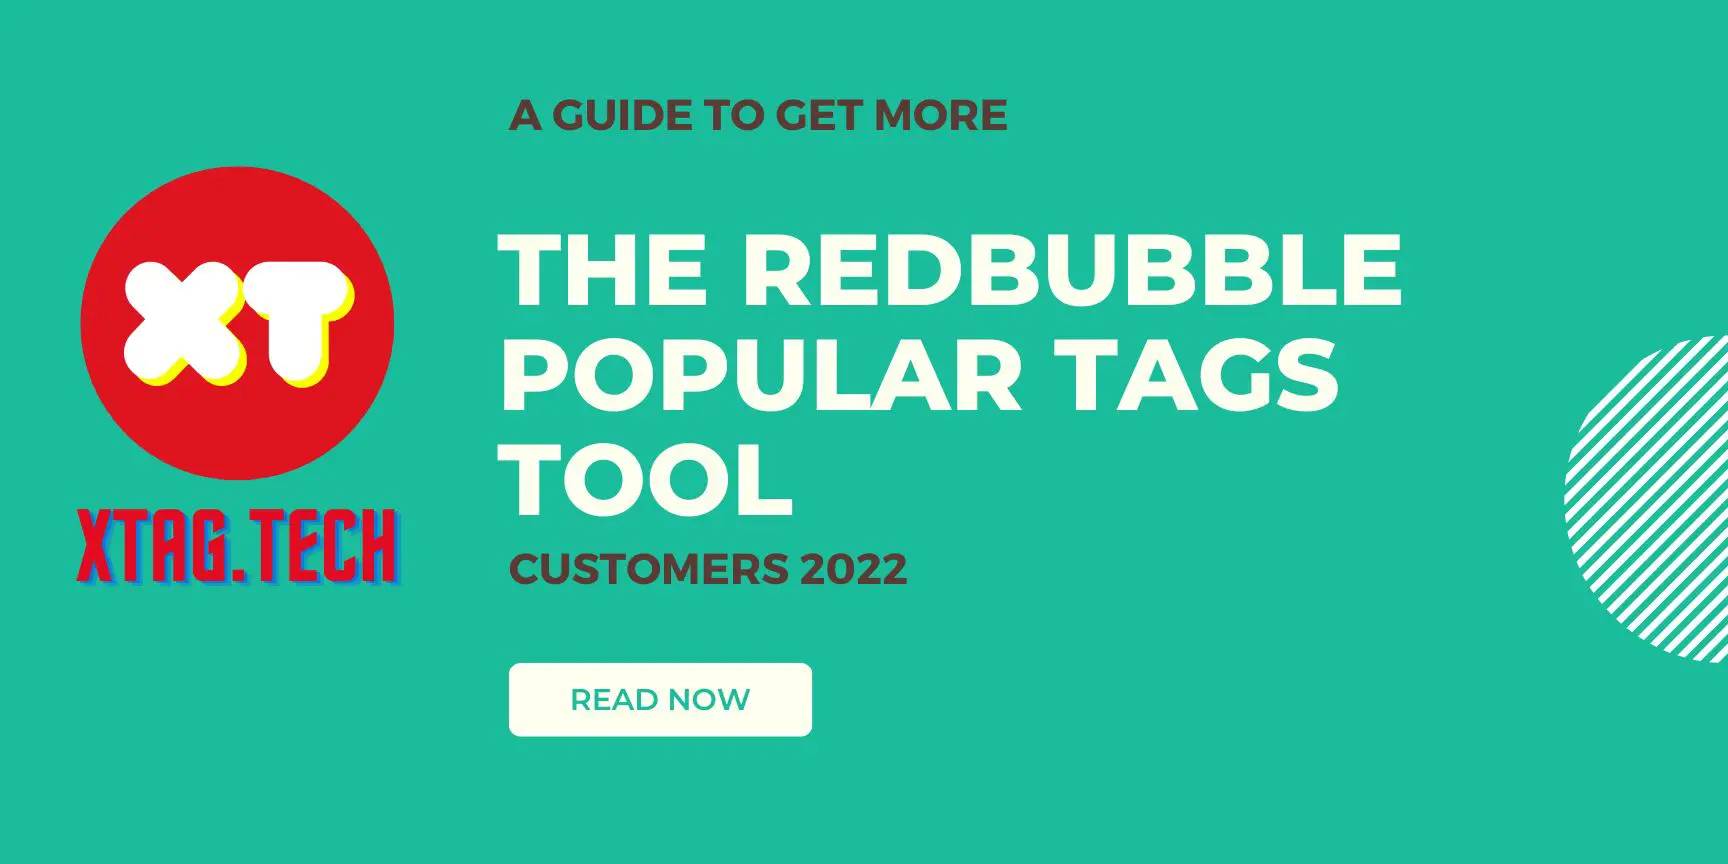 The Redbubble Popular Tags Tool: A Guide to Get More Customers 2022